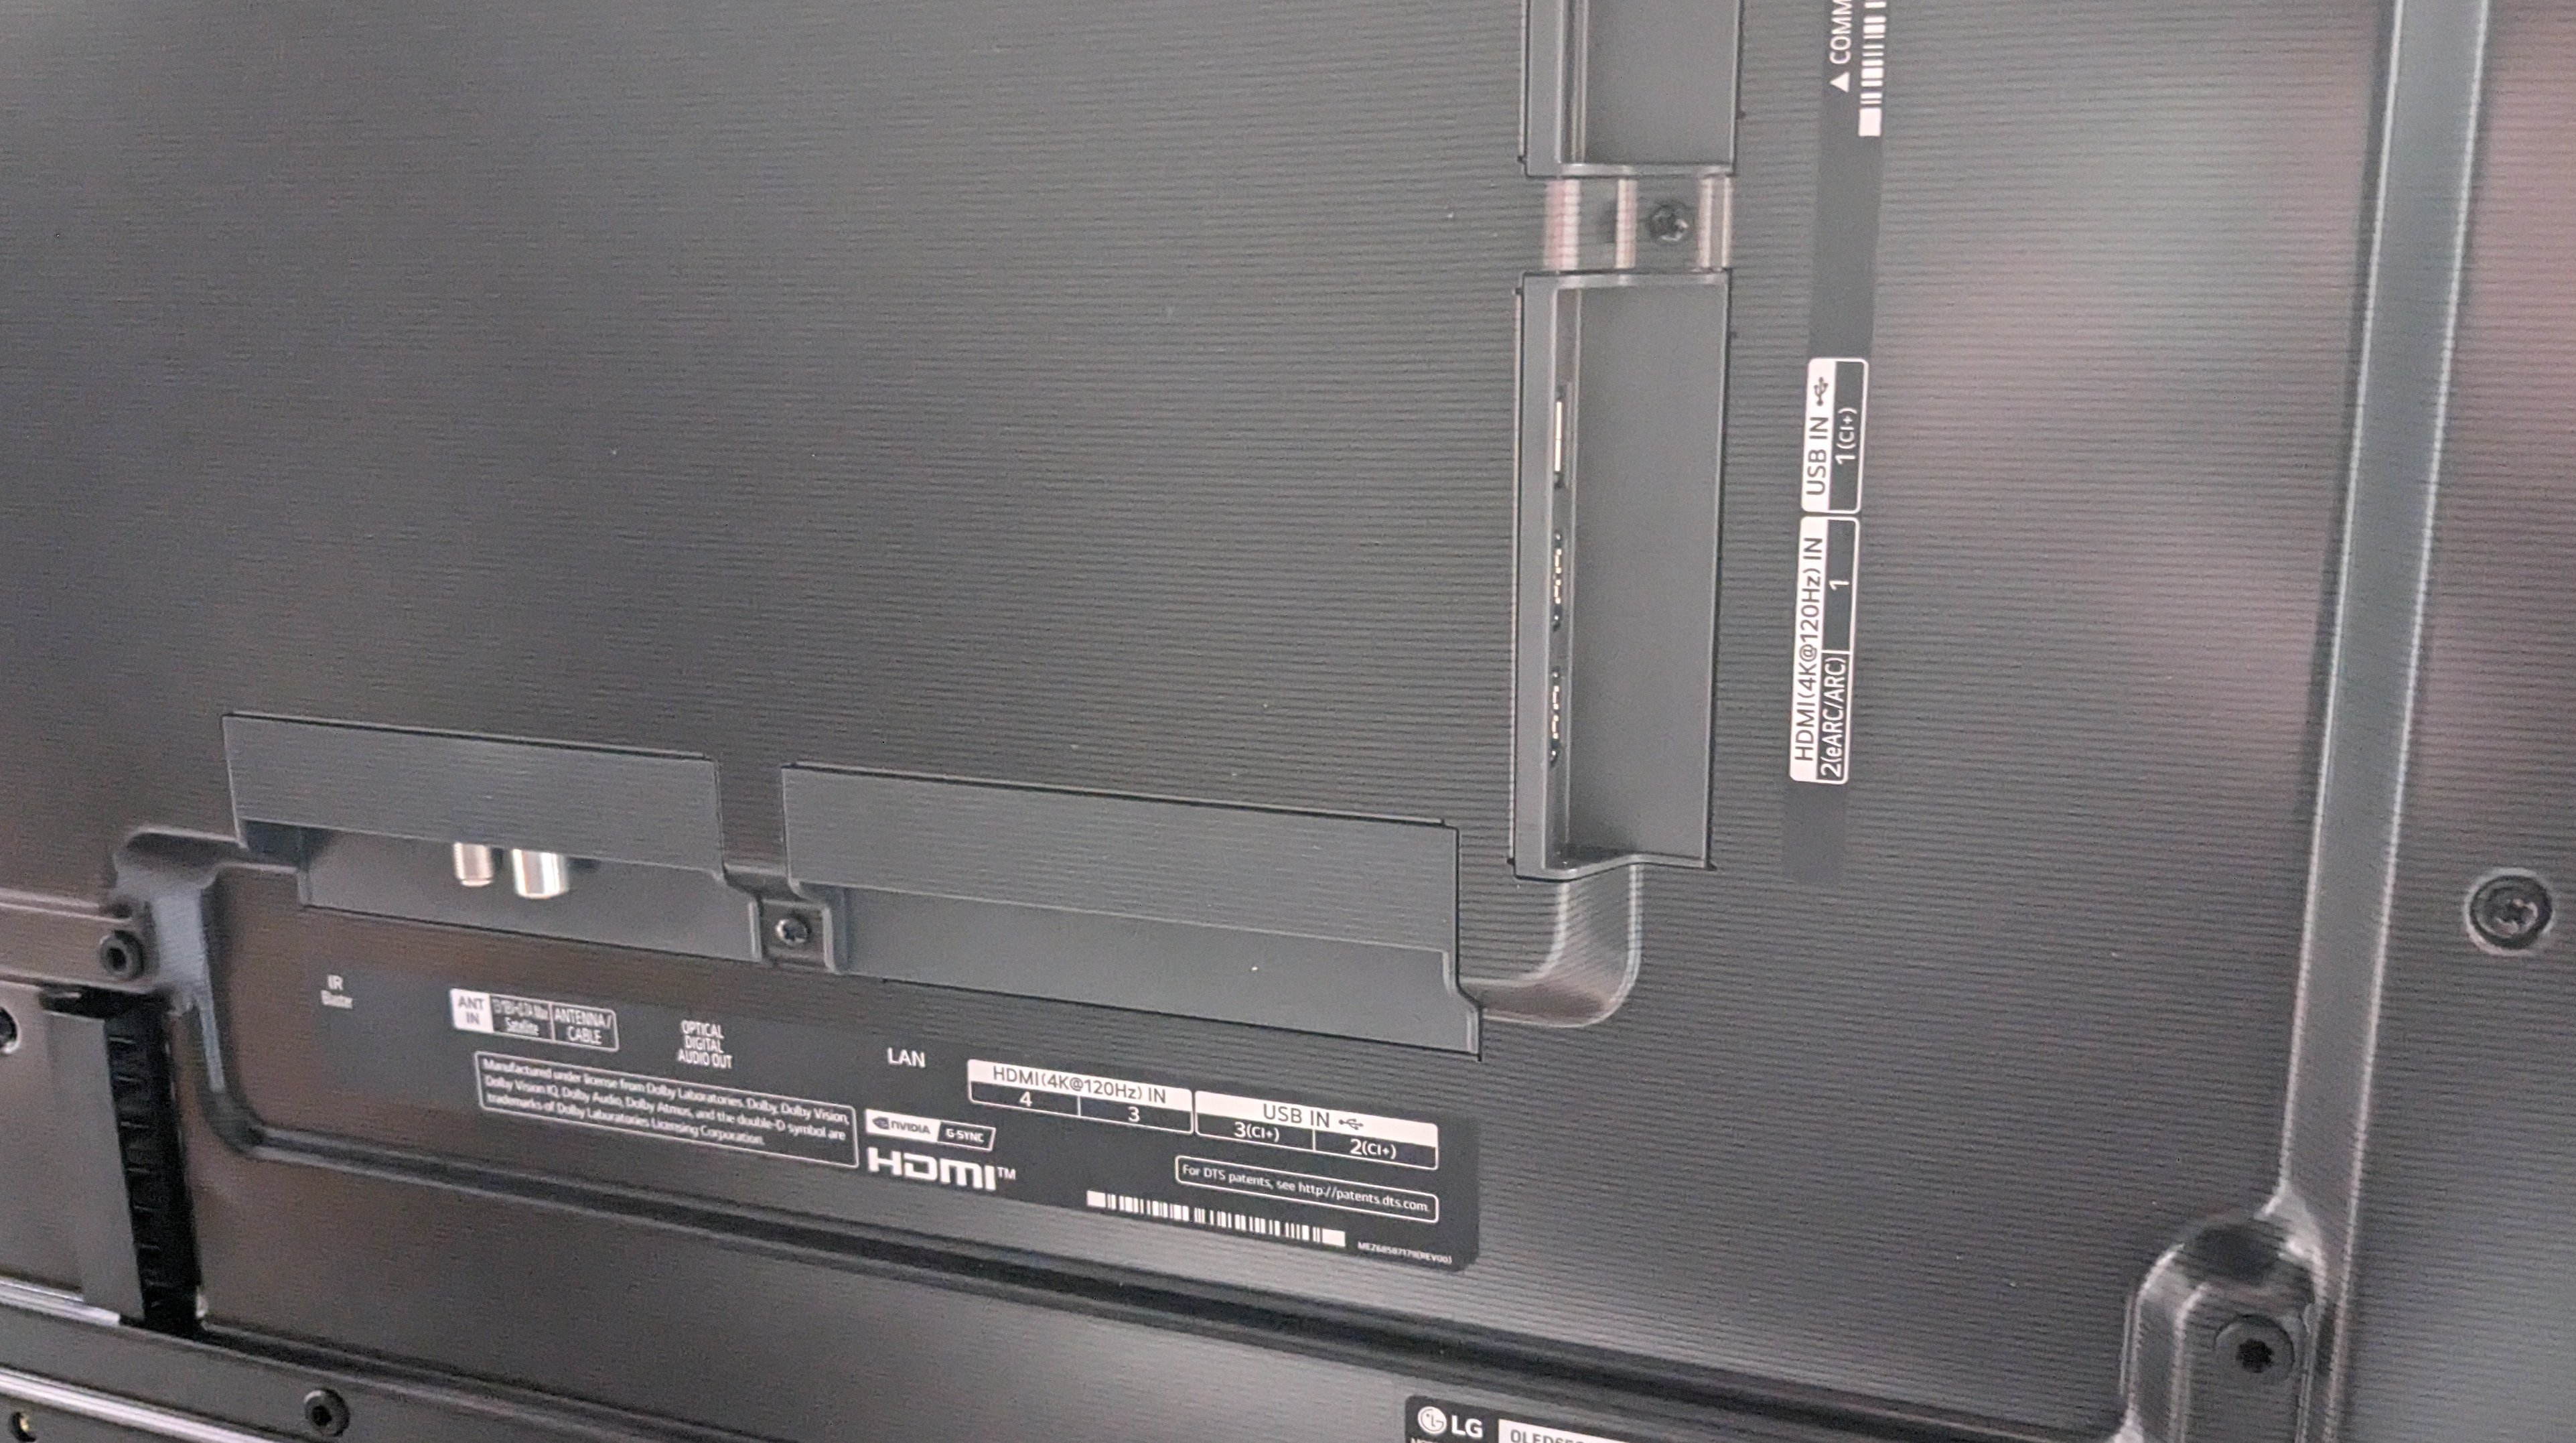 Rear of LG G3 showing connections and ports